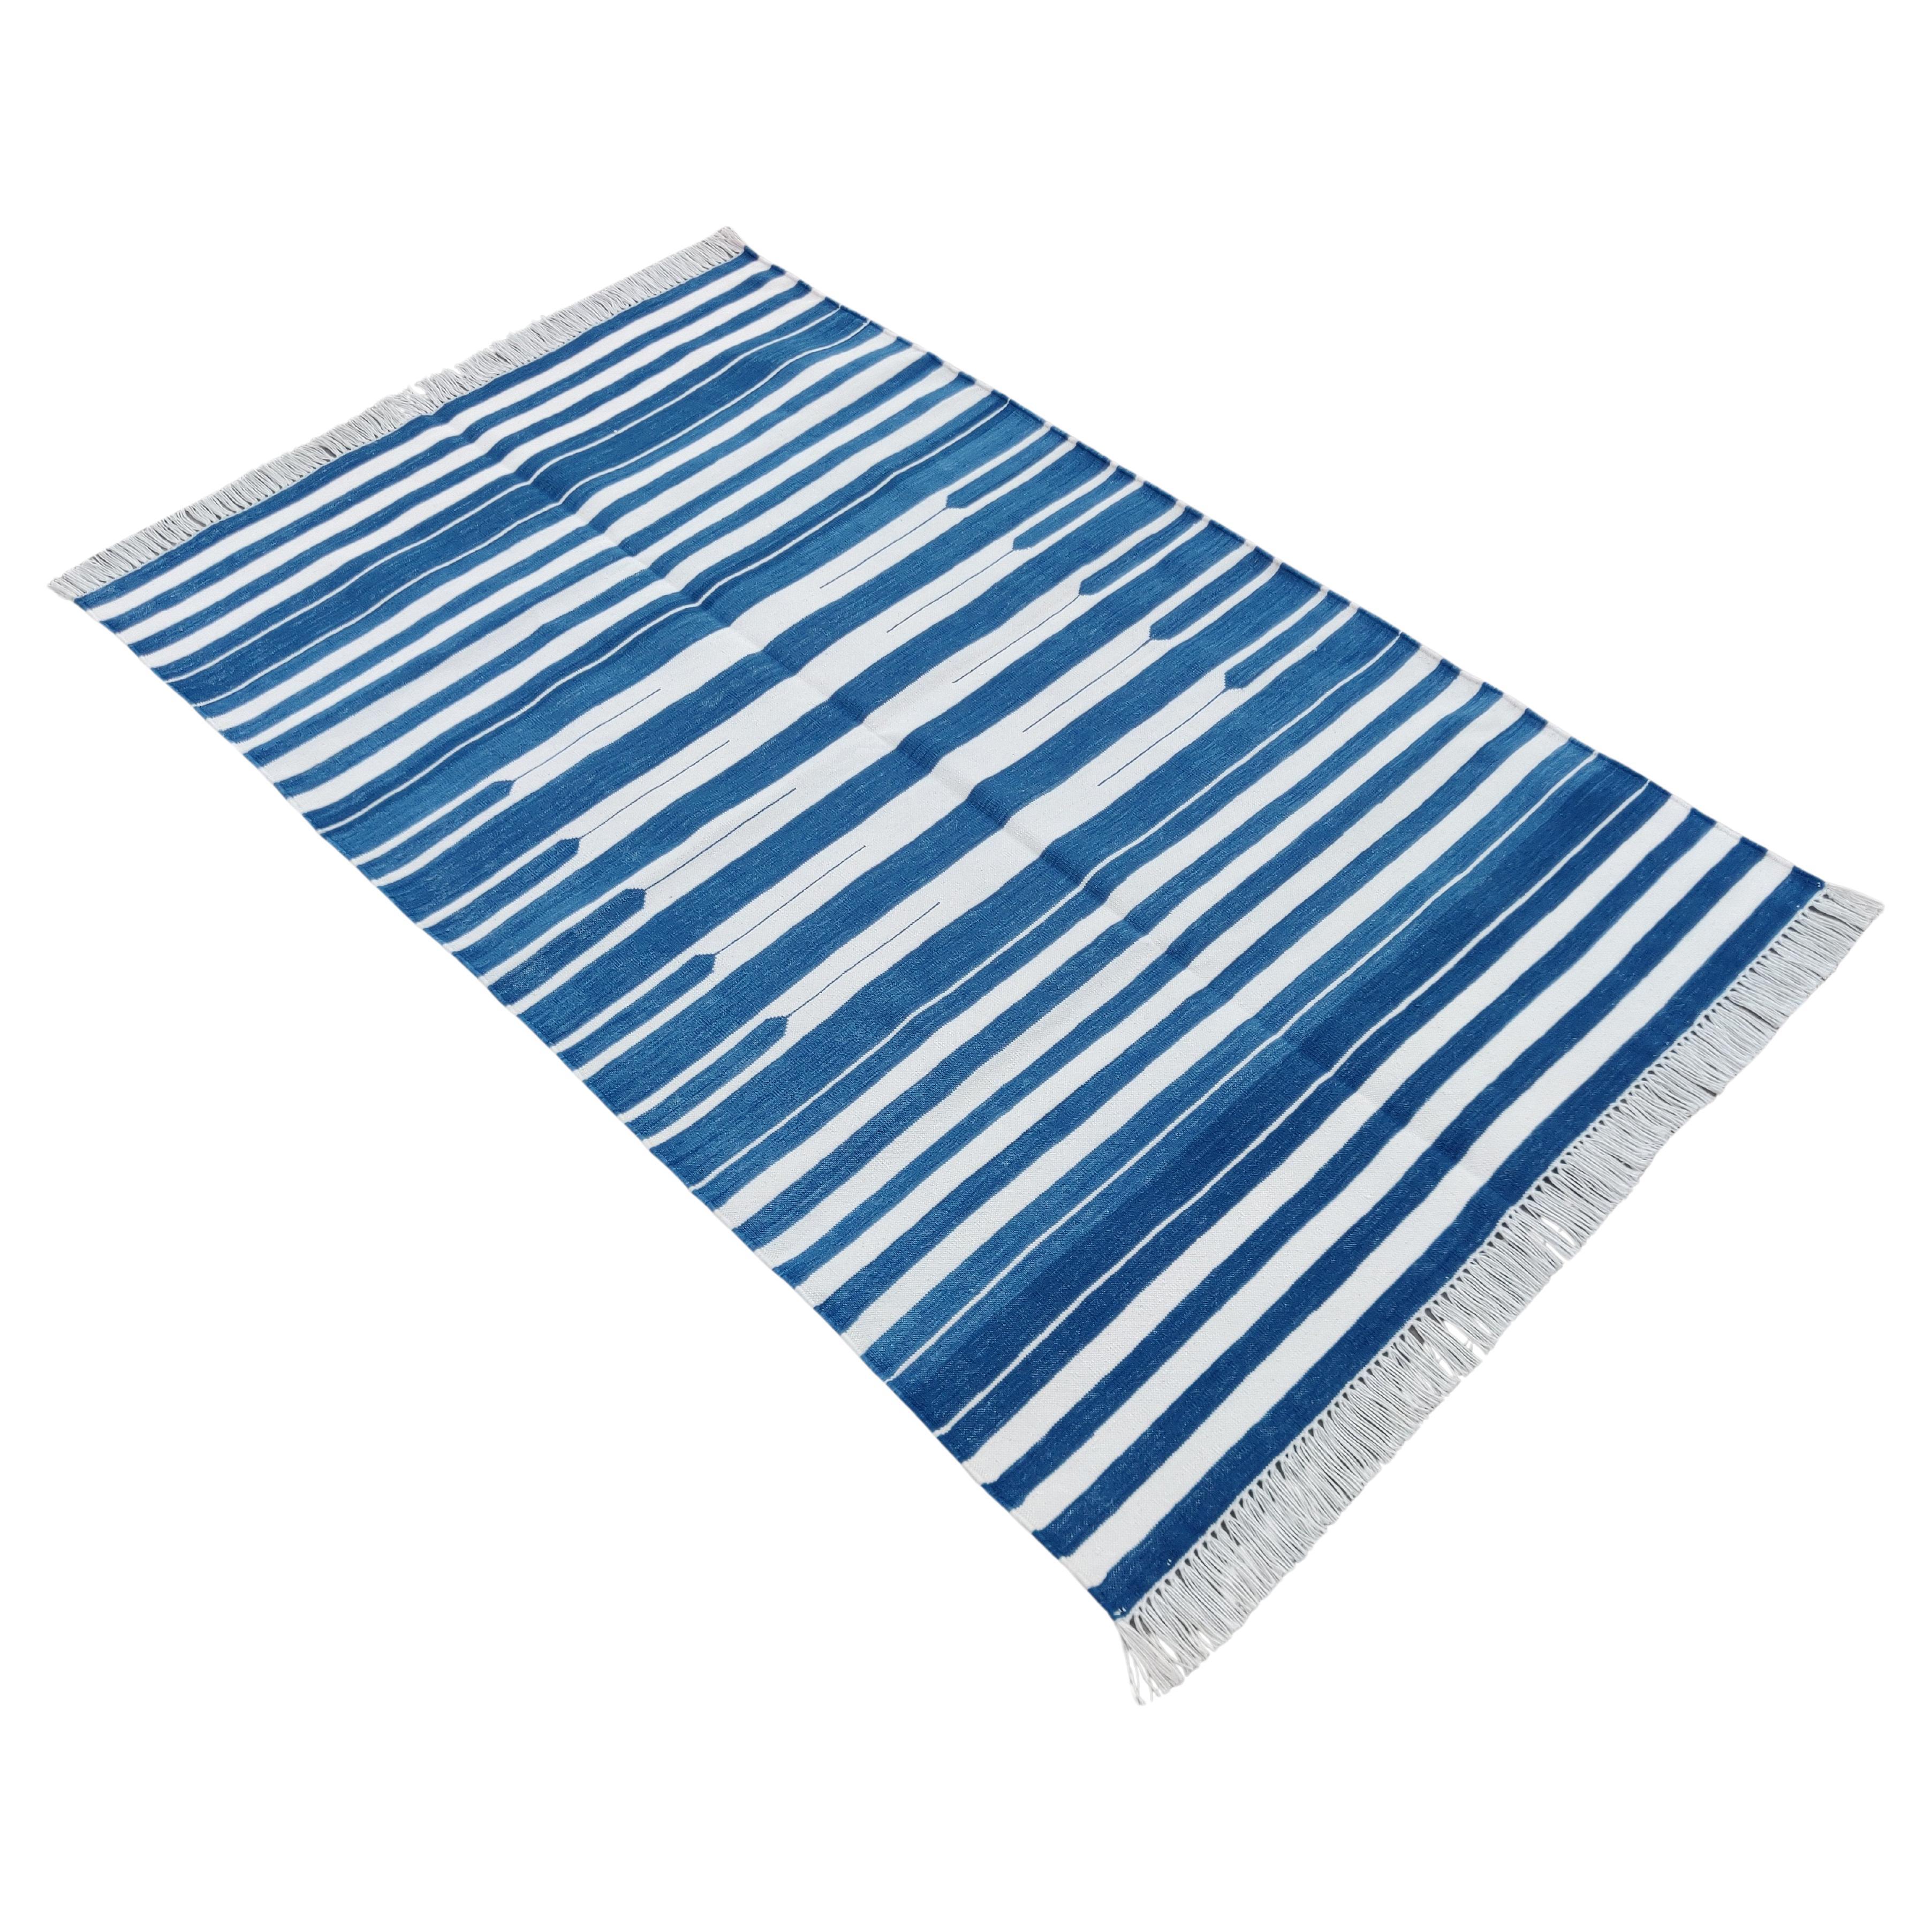 Handmade Cotton Area Flat Weave Rug, 3x5 Blue And White Striped Indian Dhurrie